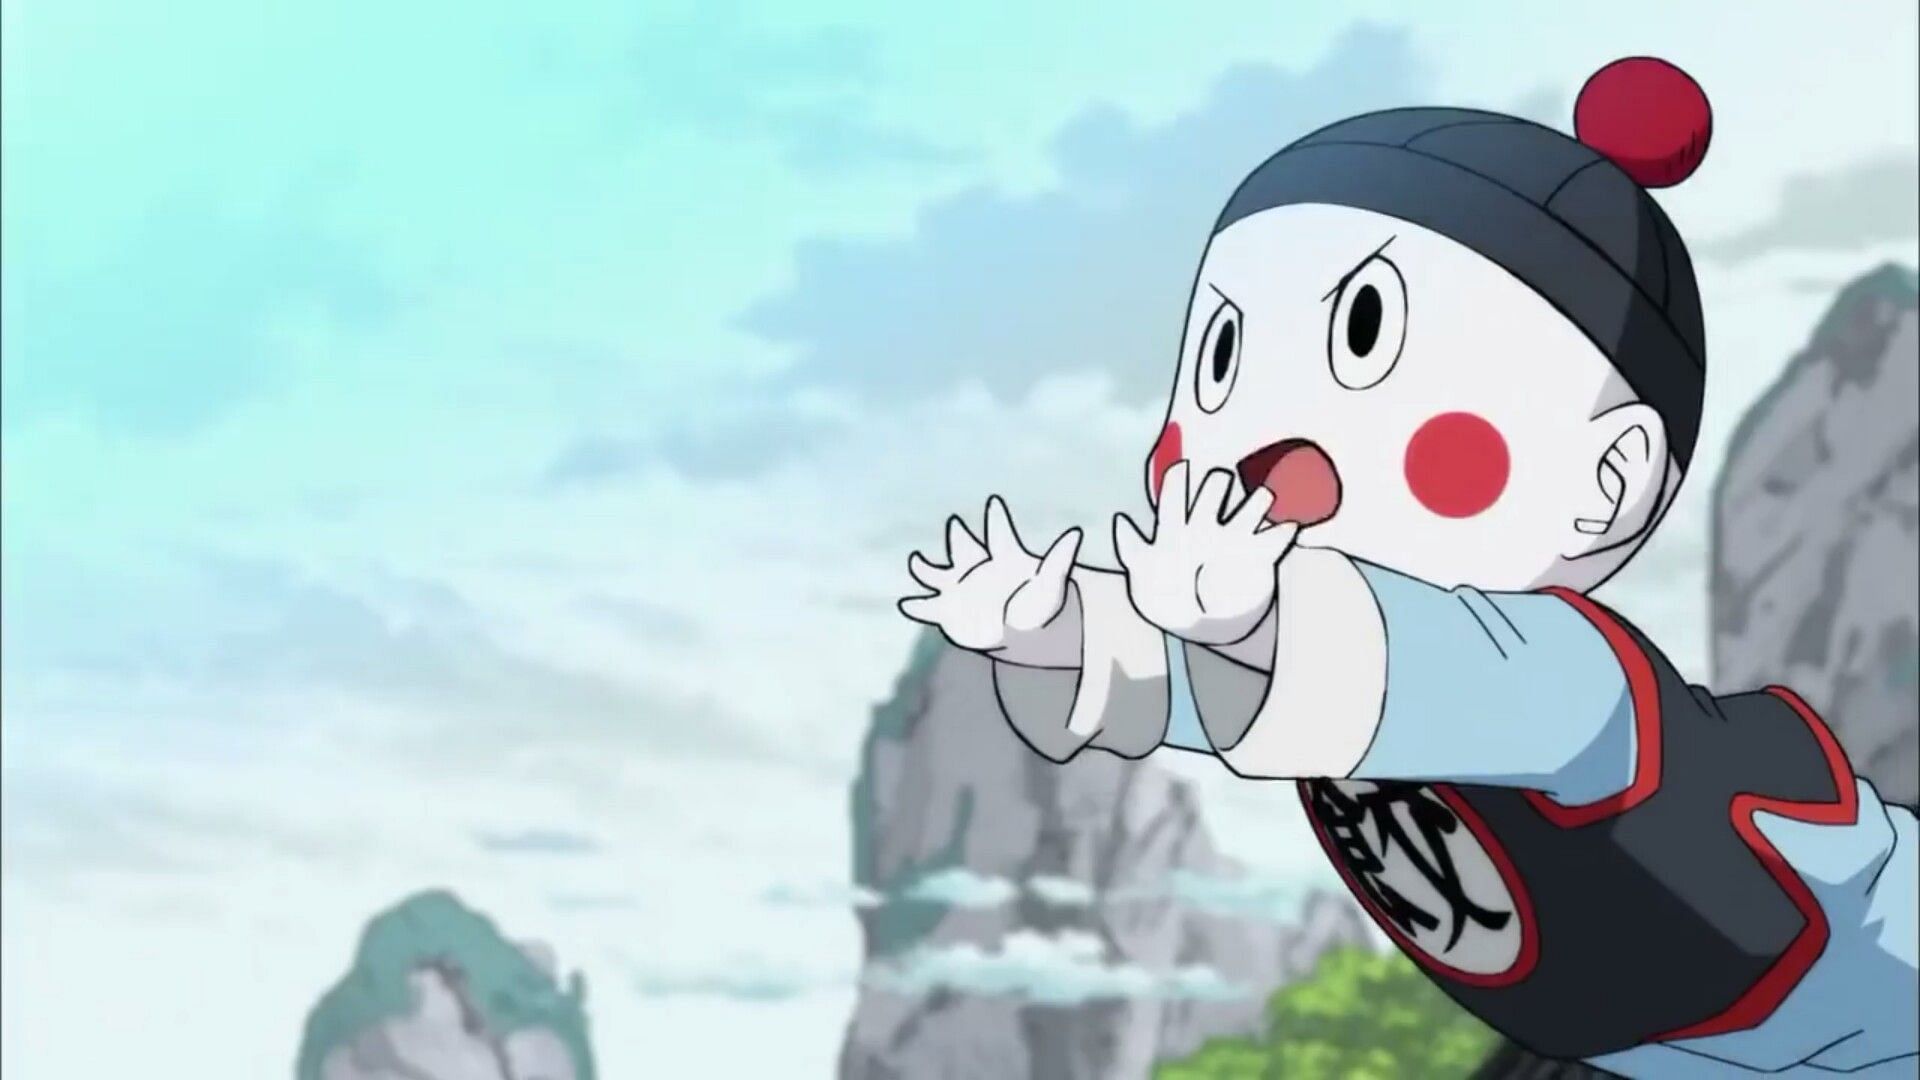 Chiaotzu is a character deserving of more screentime (Image via Toei Animation)